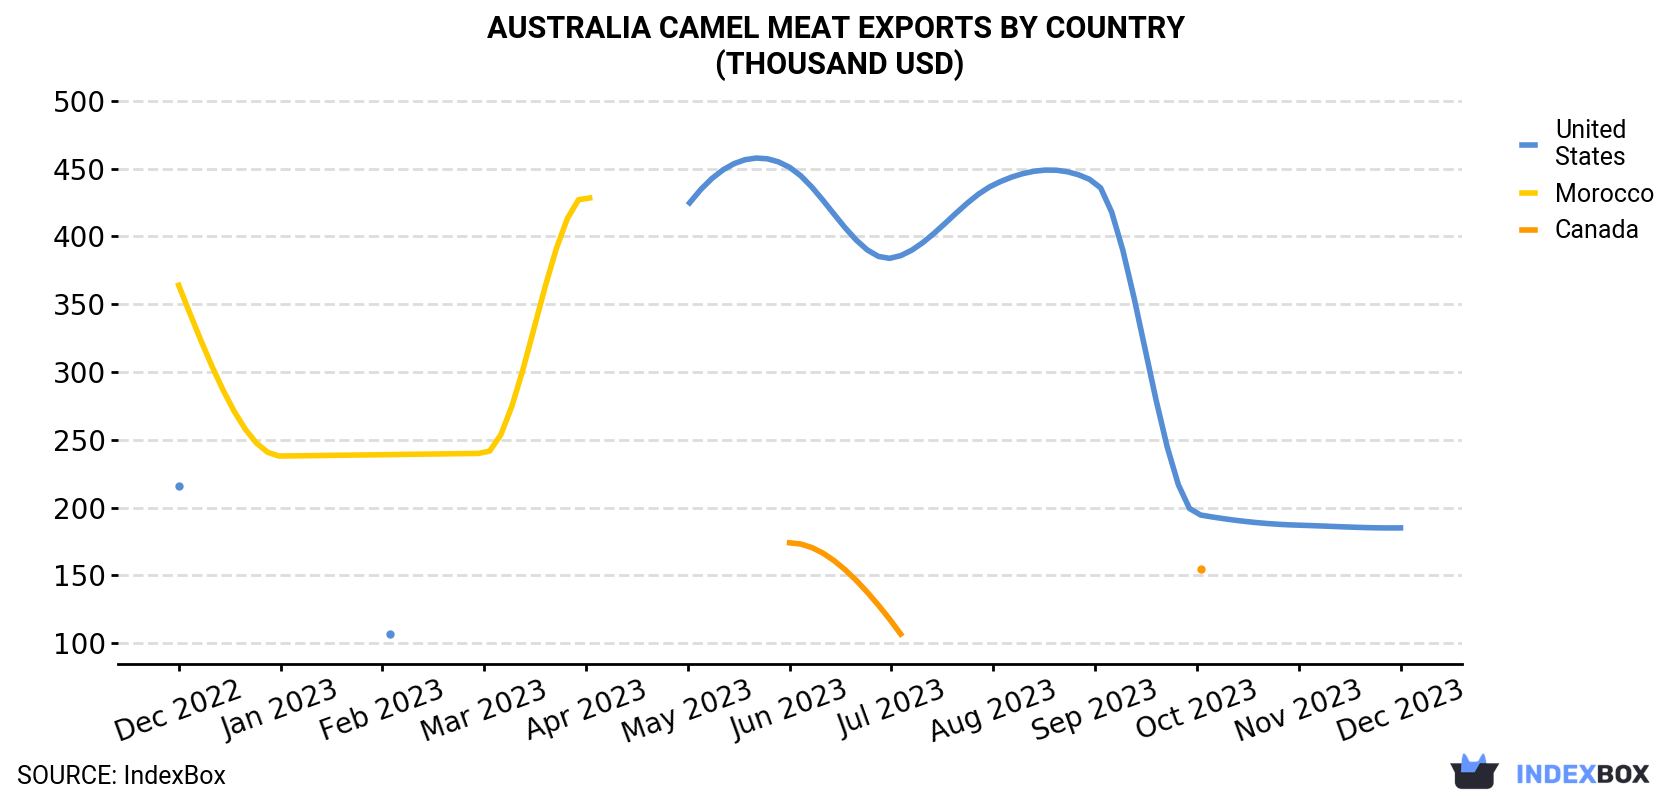 Australia Camel Meat Exports By Country (Thousand USD)